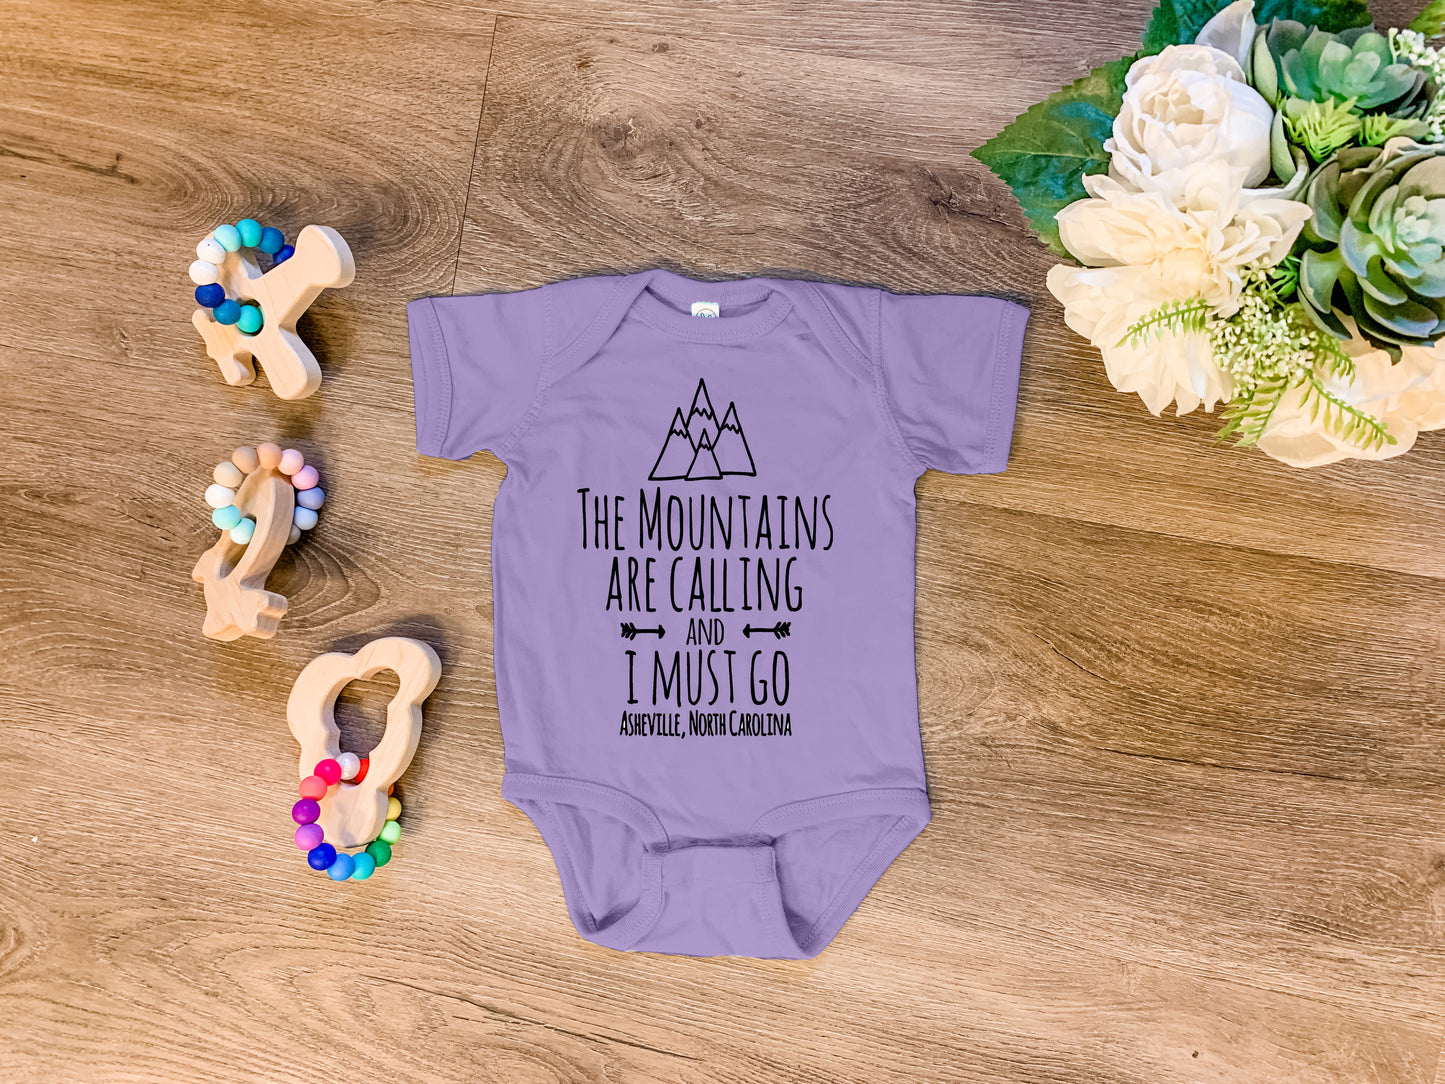 The Mountains Are Calling And I Must Go, Asheville North Carolina - Onesie - Heather Gray, Chill, or Lavender